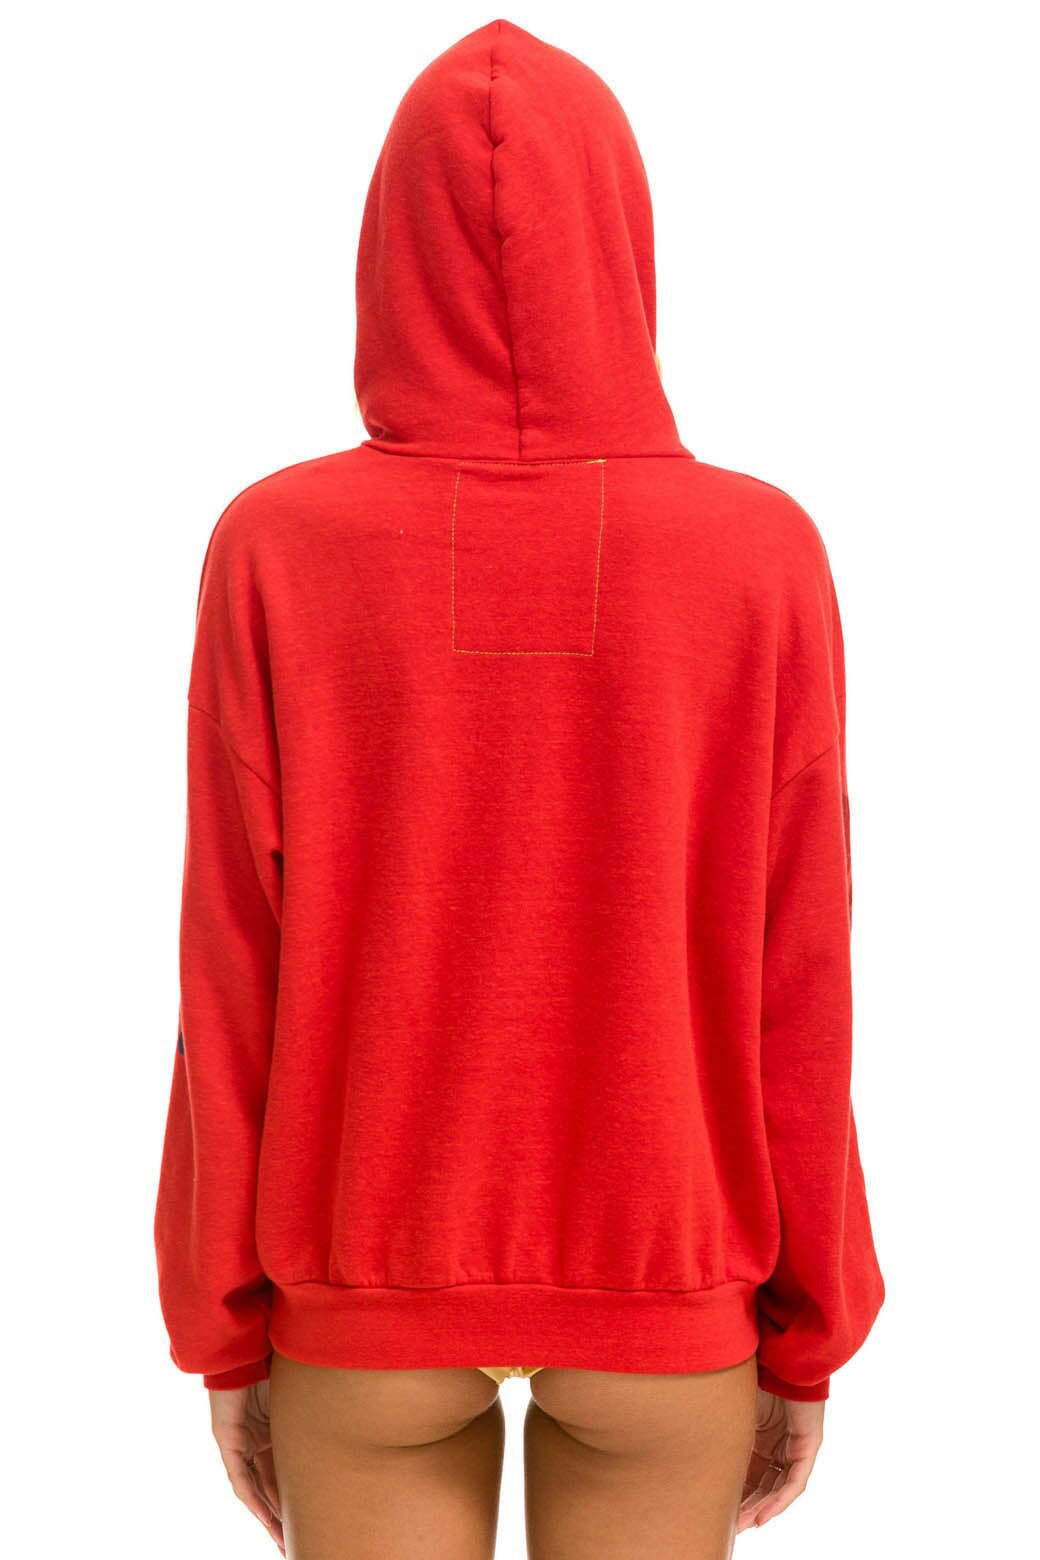 AVIATOR NATION NEW YORK CITY RELAXED PULLOVER HOODIE - RED Hoodie Aviator Nation 